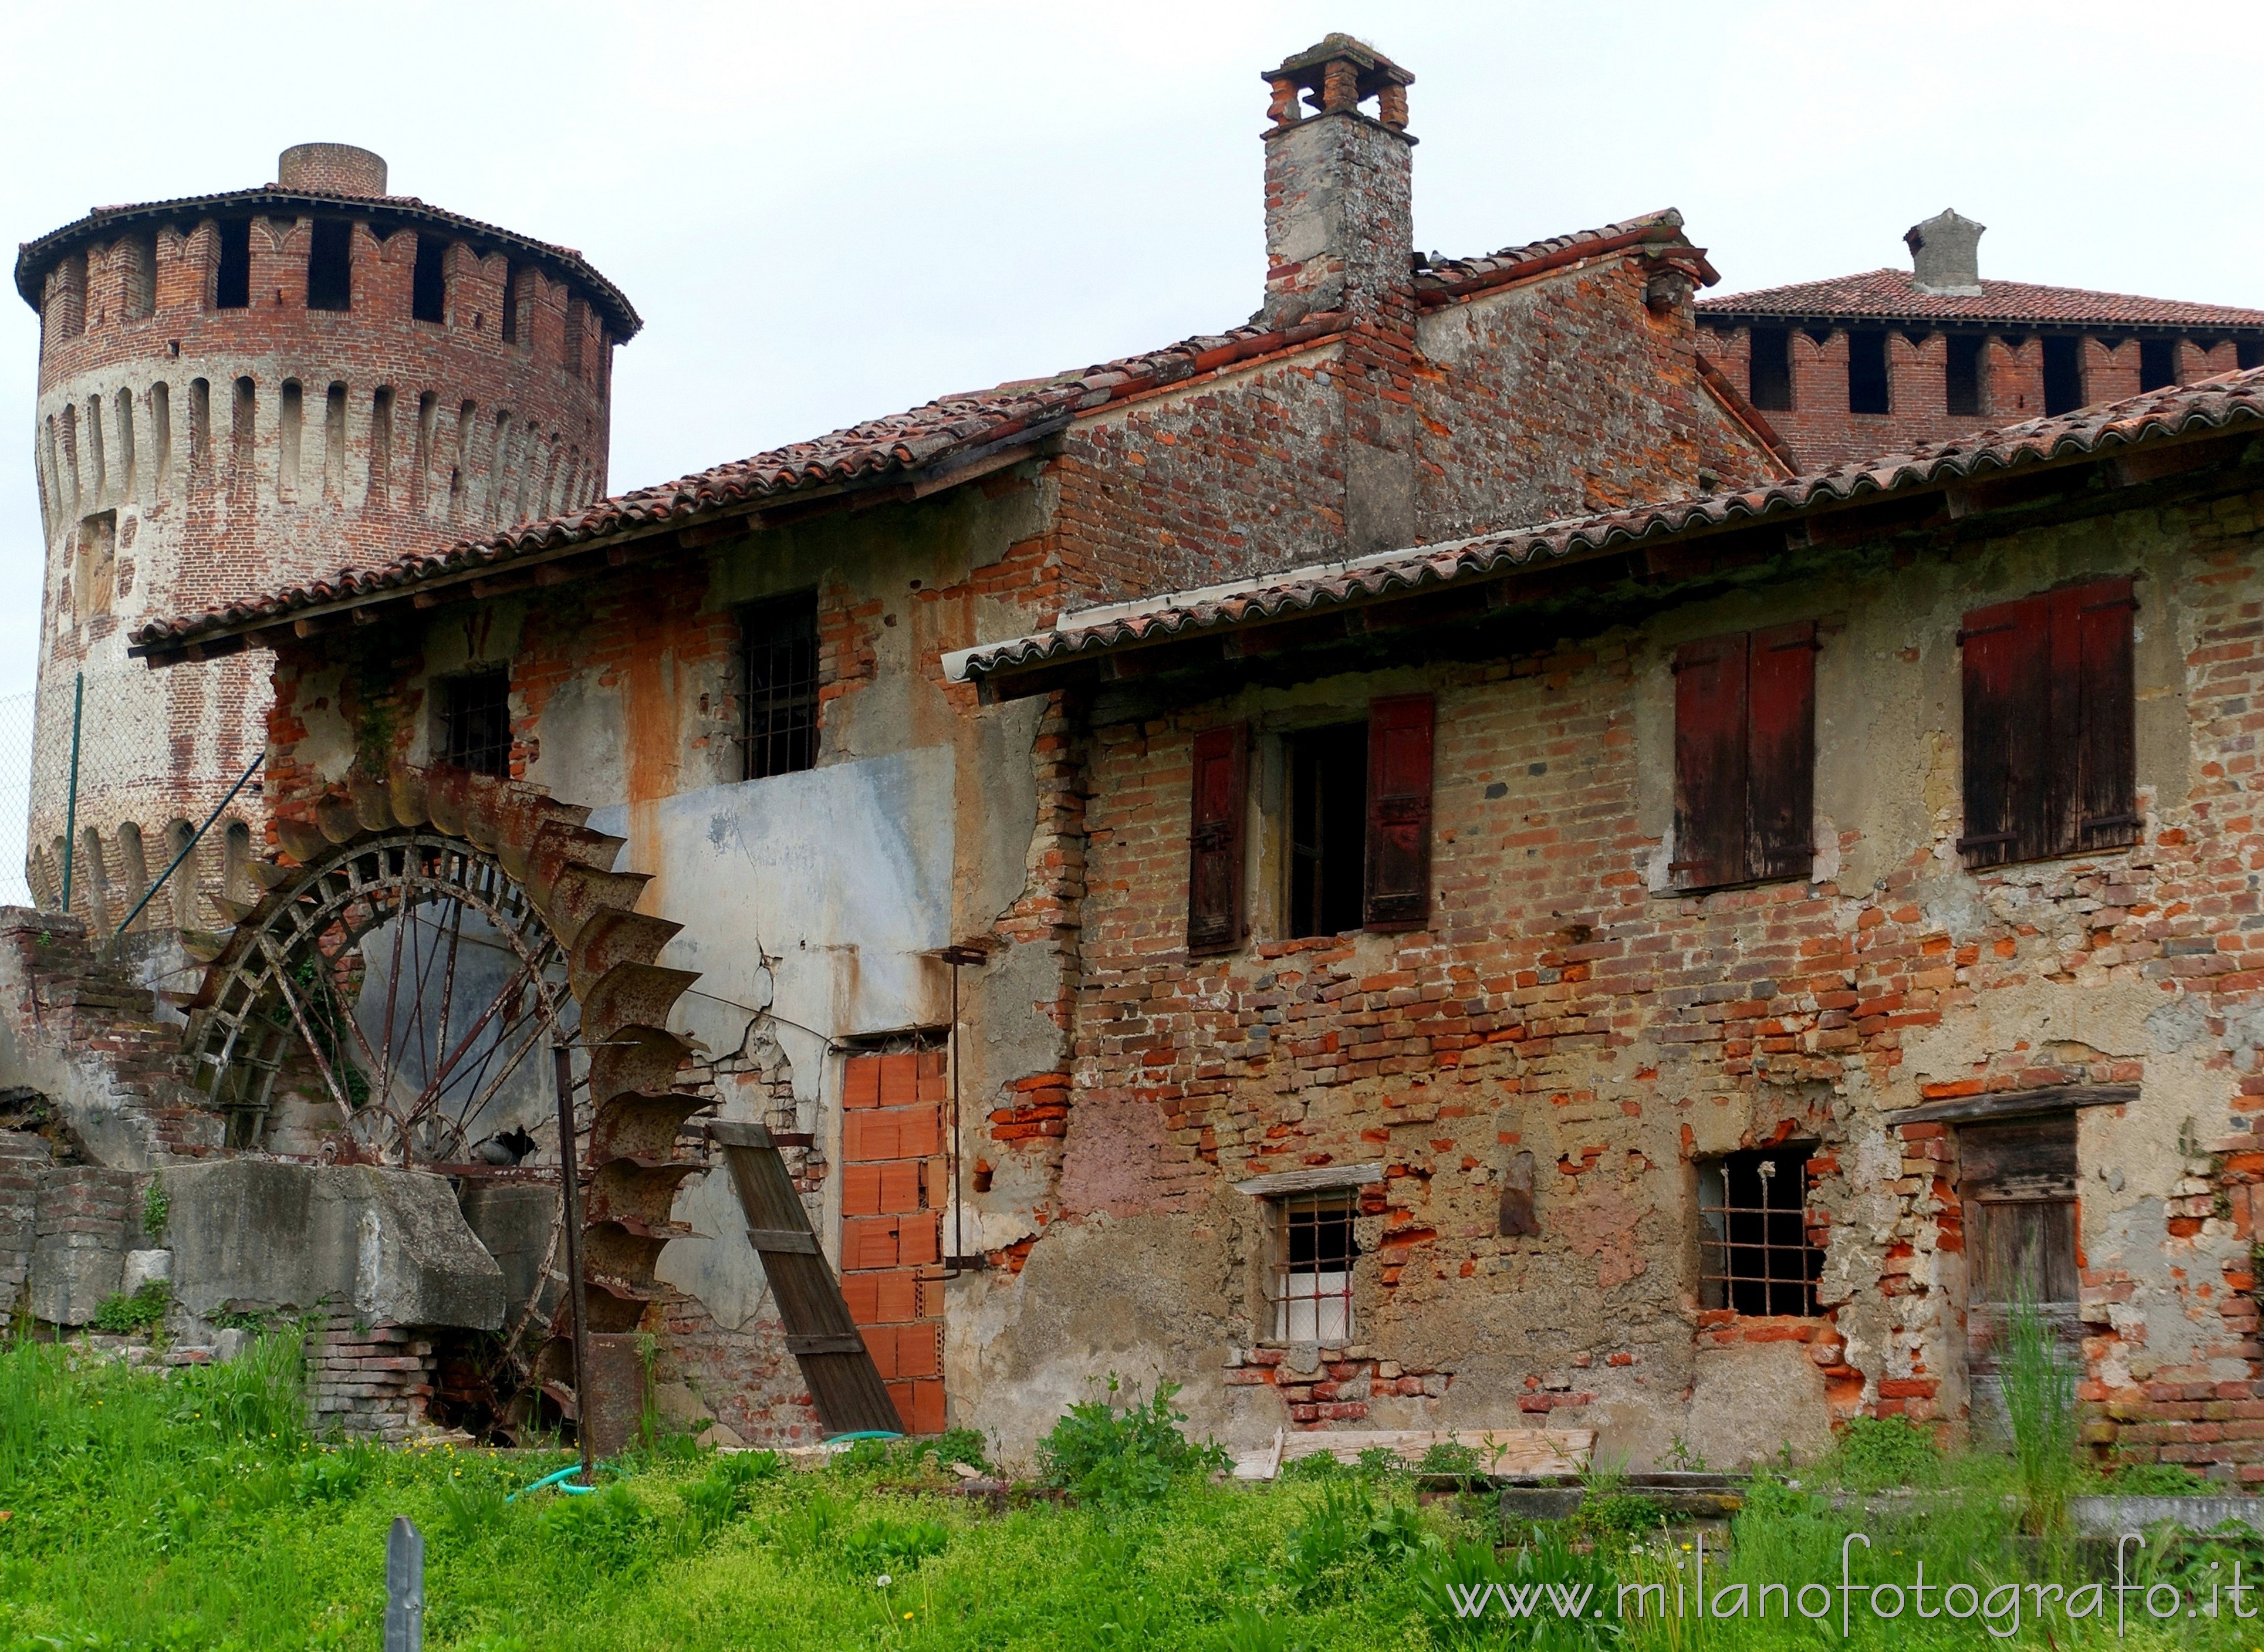 Soncino (Cremona, Italy): Old mill and two towers of the fortess of Soncino - Soncino (Cremona, Italy)